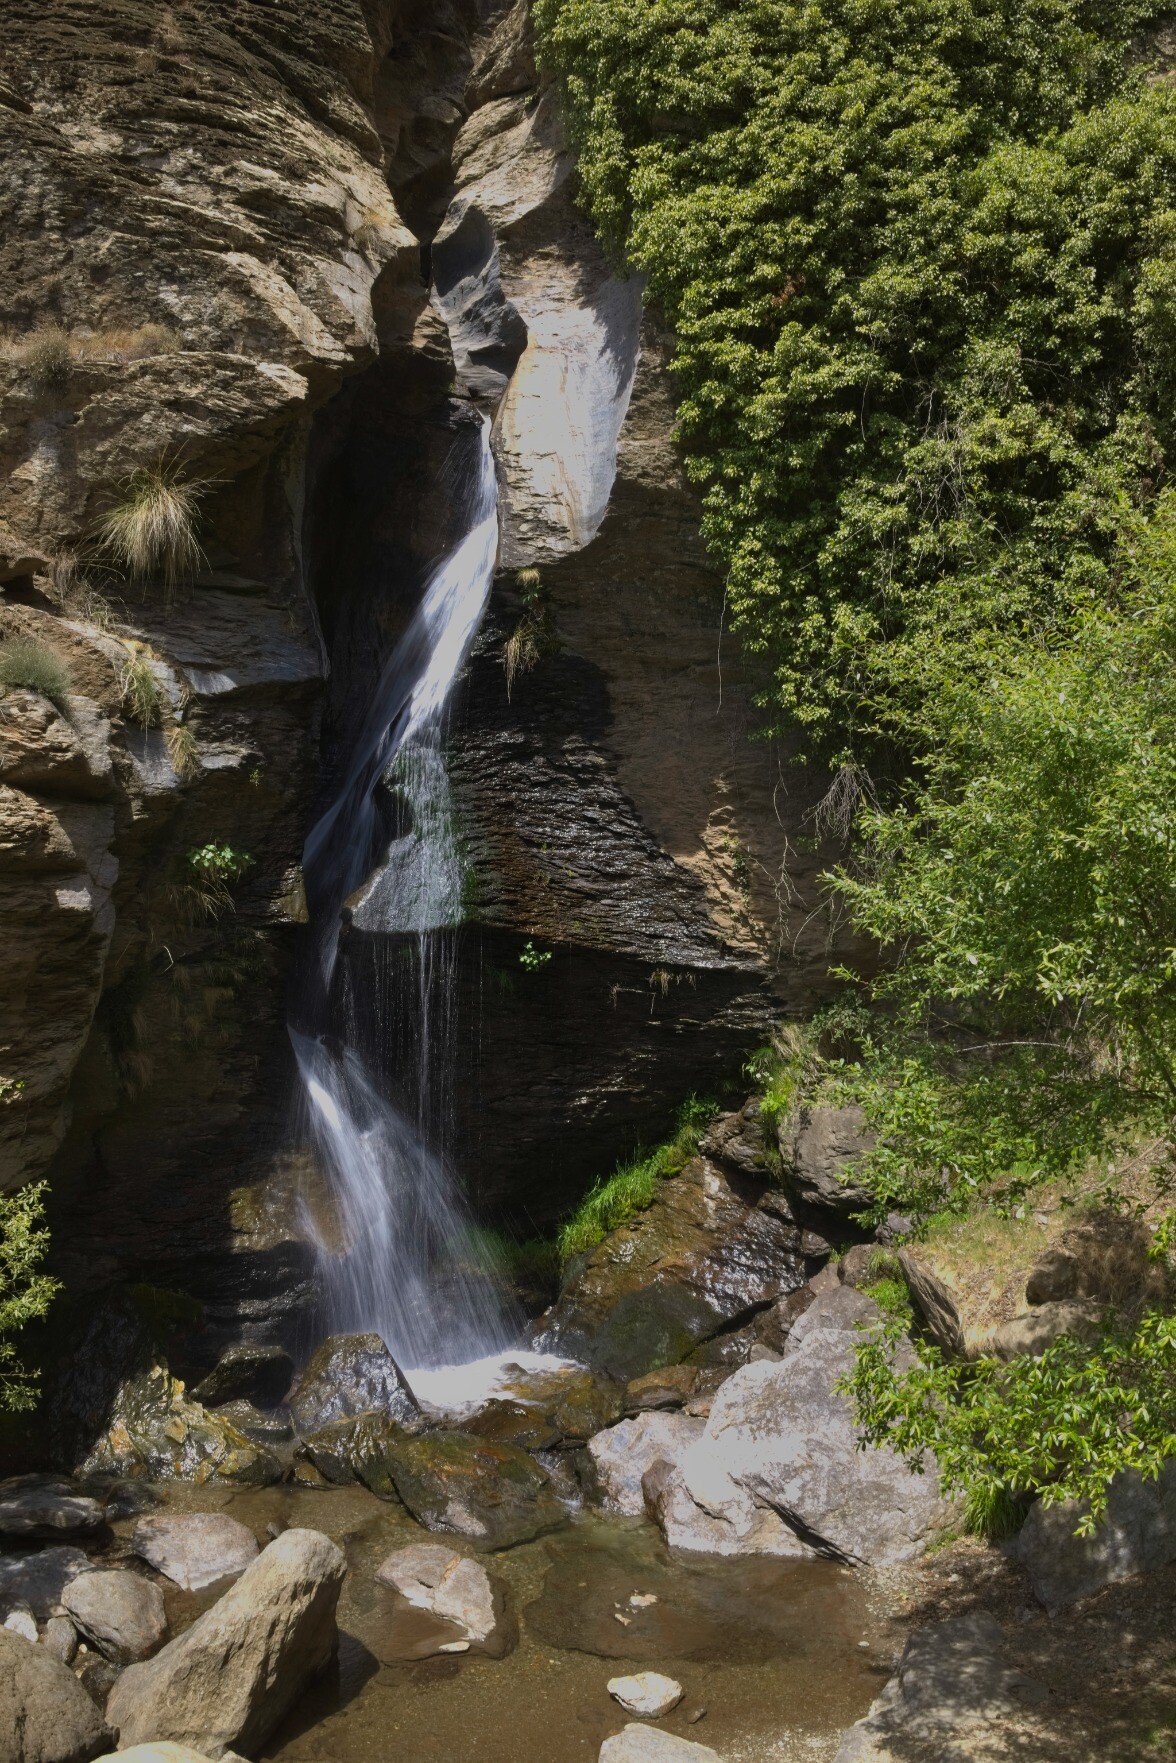 Water plunges down through a narrow gorge to form a waterfall. To the right is a lush green area of vegetation